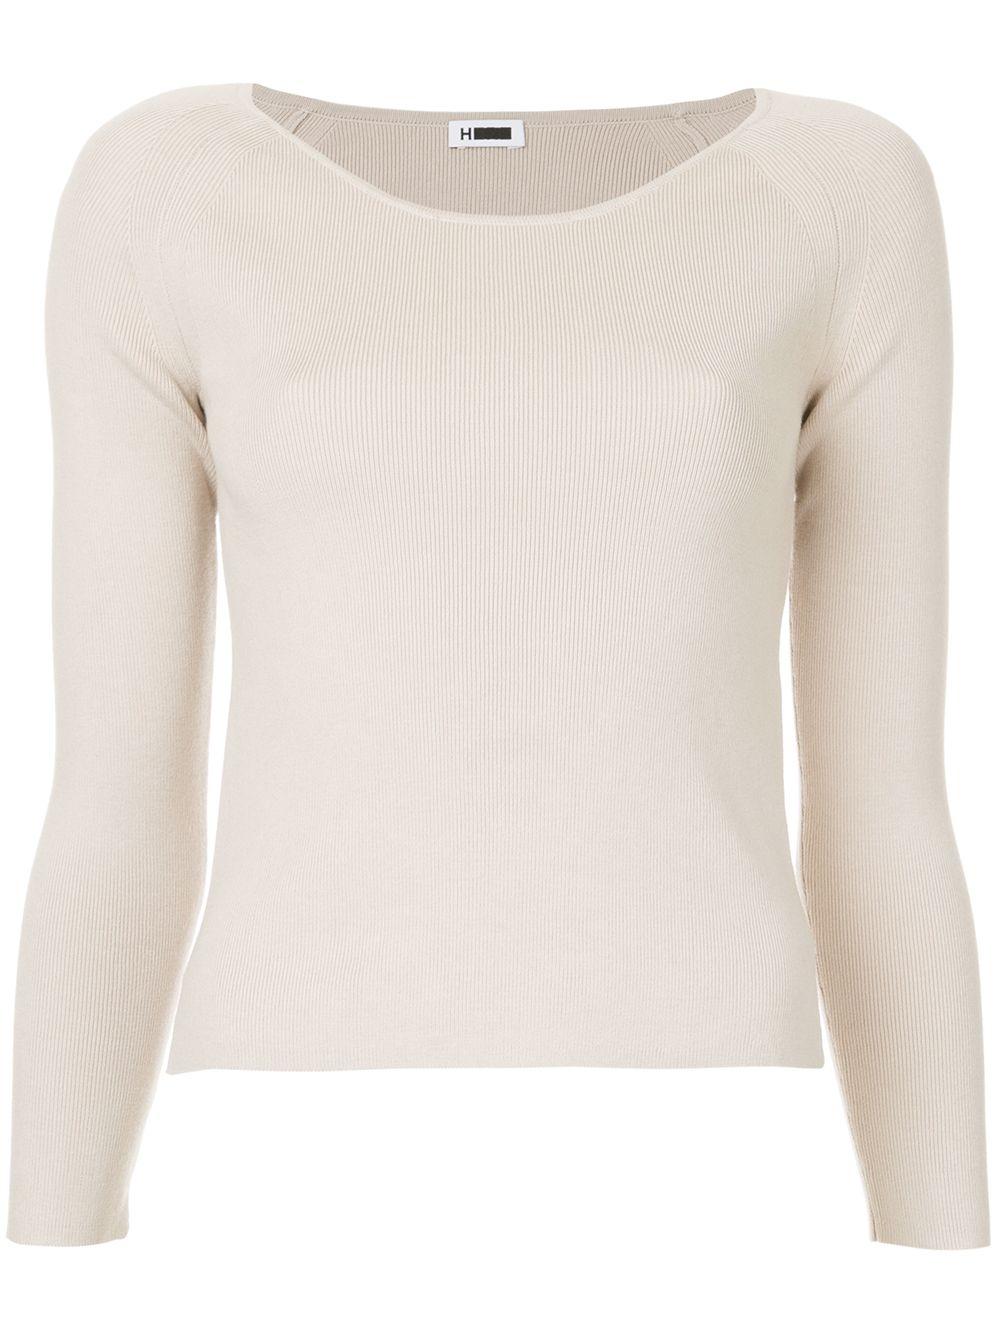 H Beauty & Youth Round Neck Jumper | ModeSens